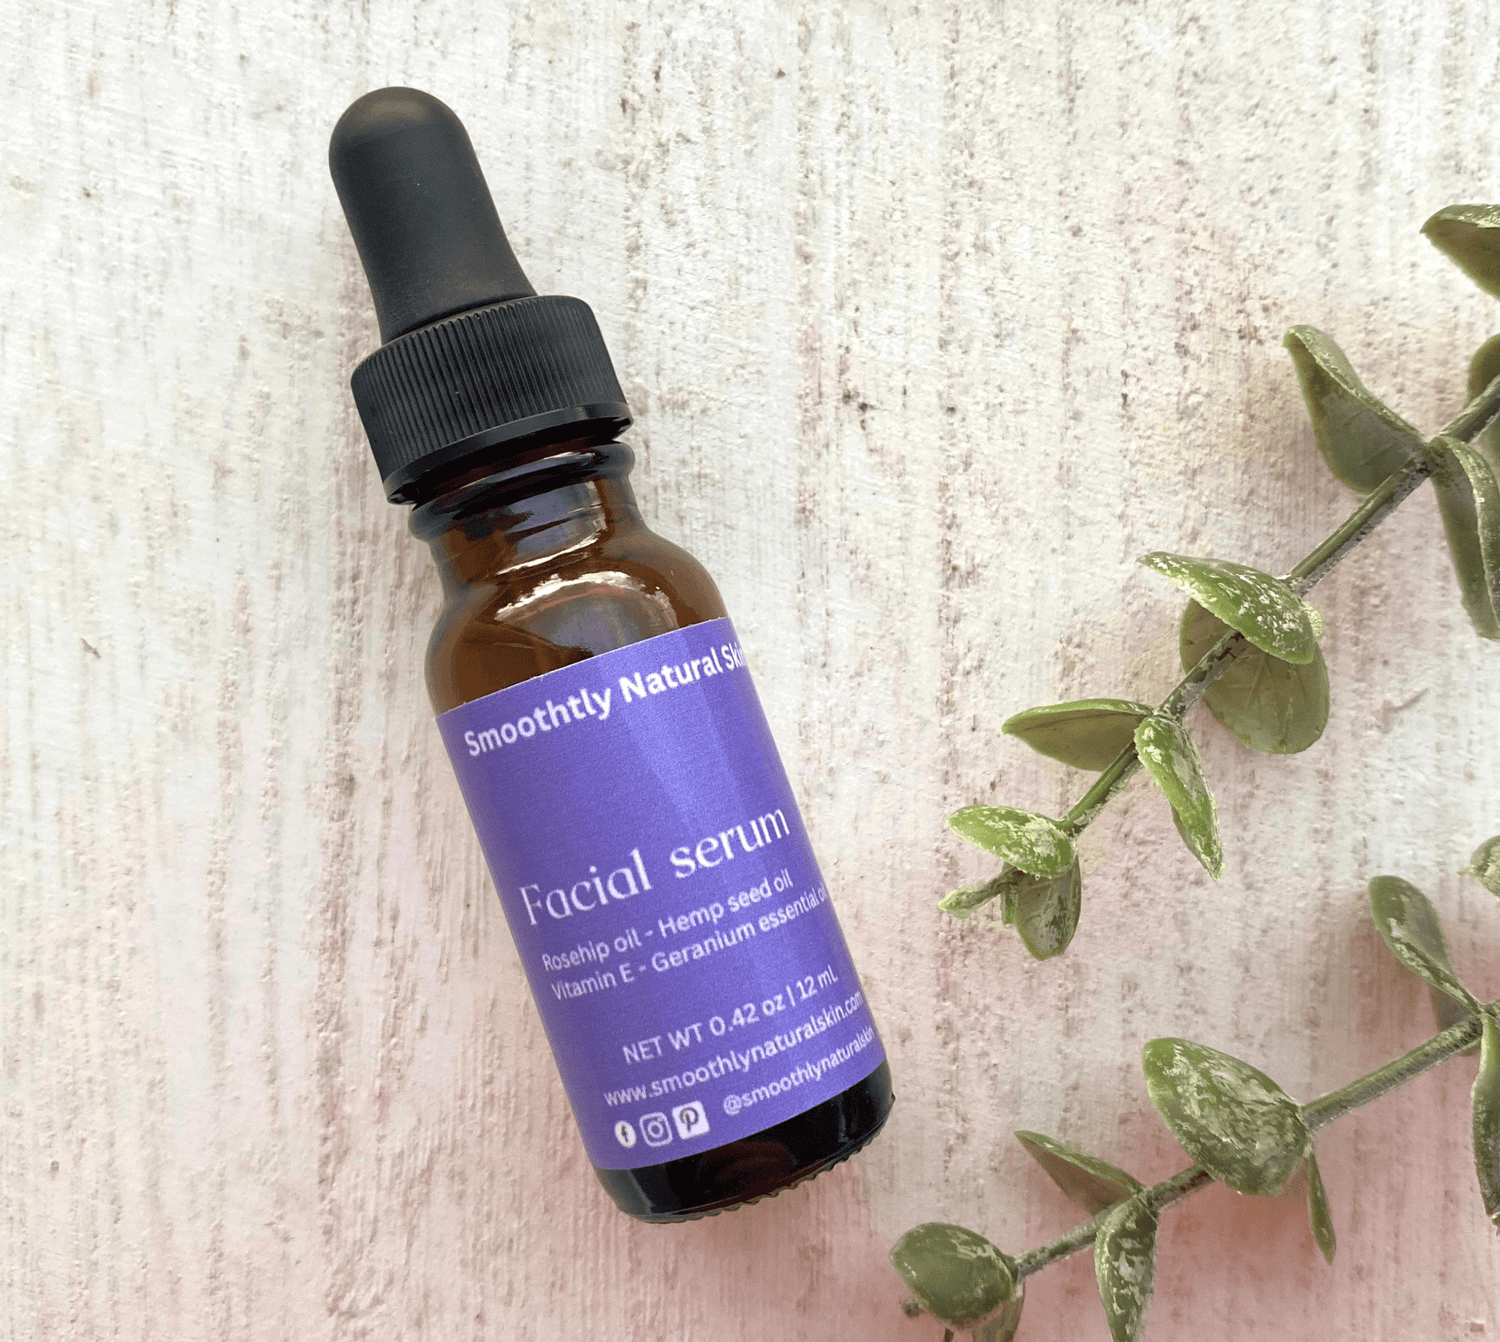 Our facial serum is great for all skin types including sensitive skin. This face serum has a lightweight that absorbs quickly into the skin. Wake up each morning with a soft and smooth skin. Our facial serum is packaged in an amber glass bottle with dropper.